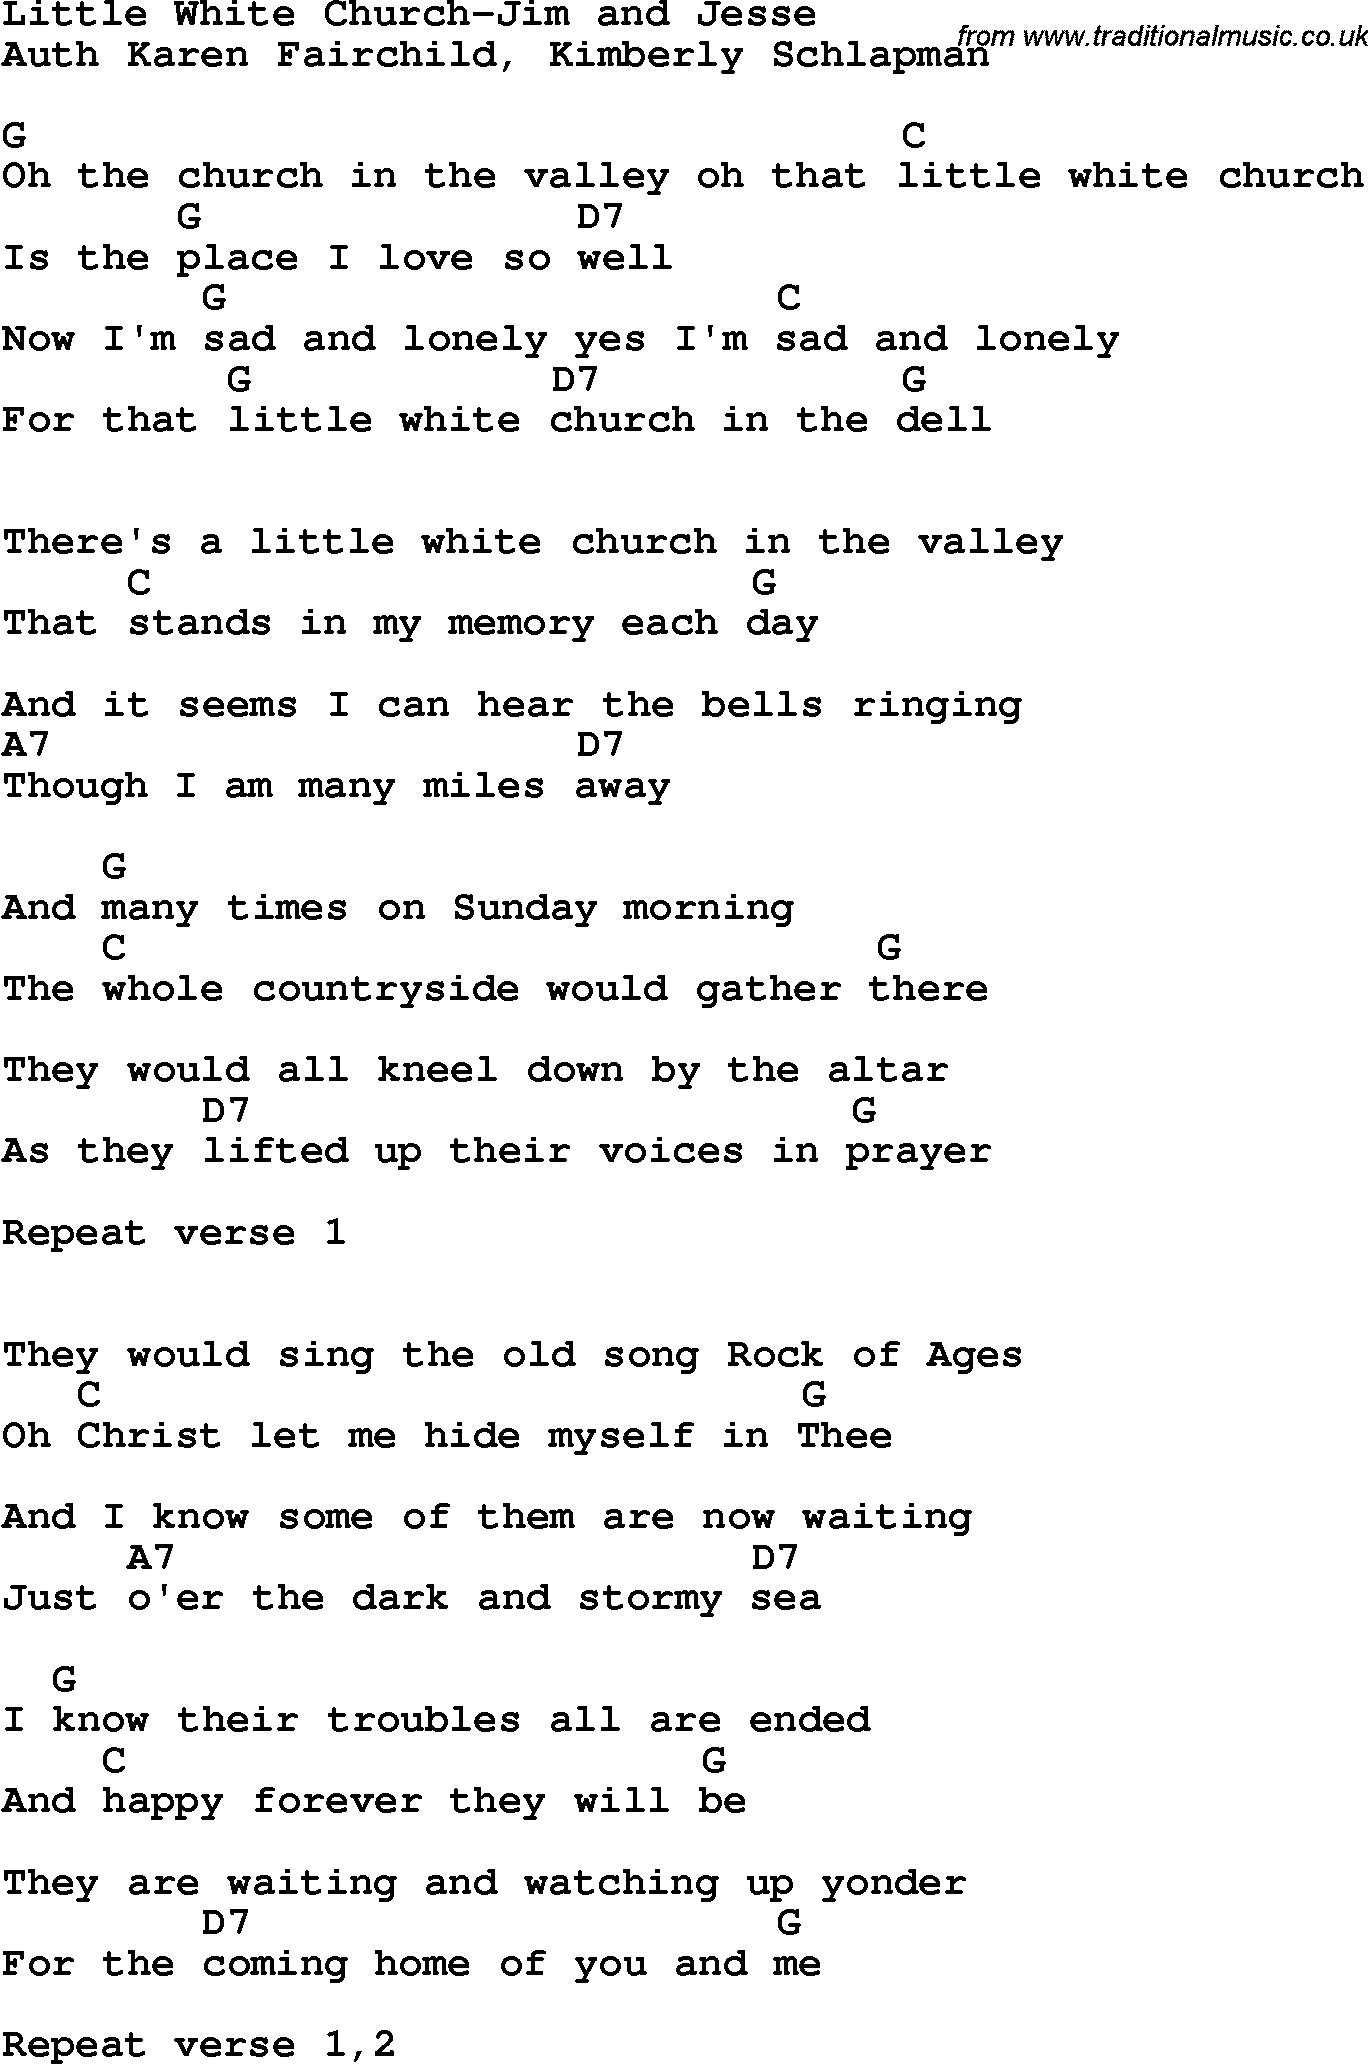 Country, Southern and Bluegrass Gospel Song Little White Church-Jim and Jesse lyrics and chords